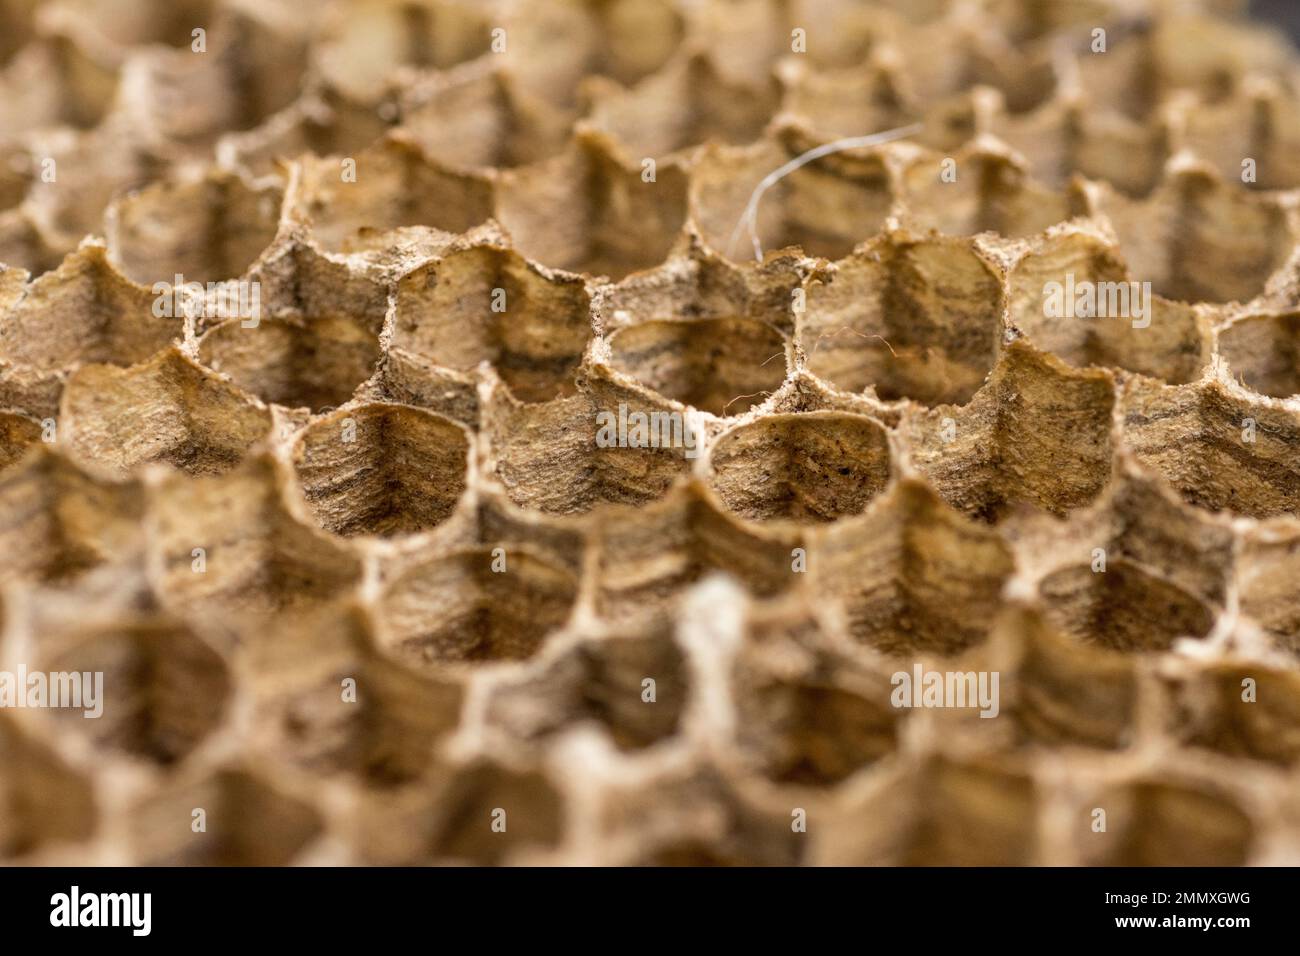 A close up of part of and old wasps nests showing the hexangle shape of the cells Stock Photo